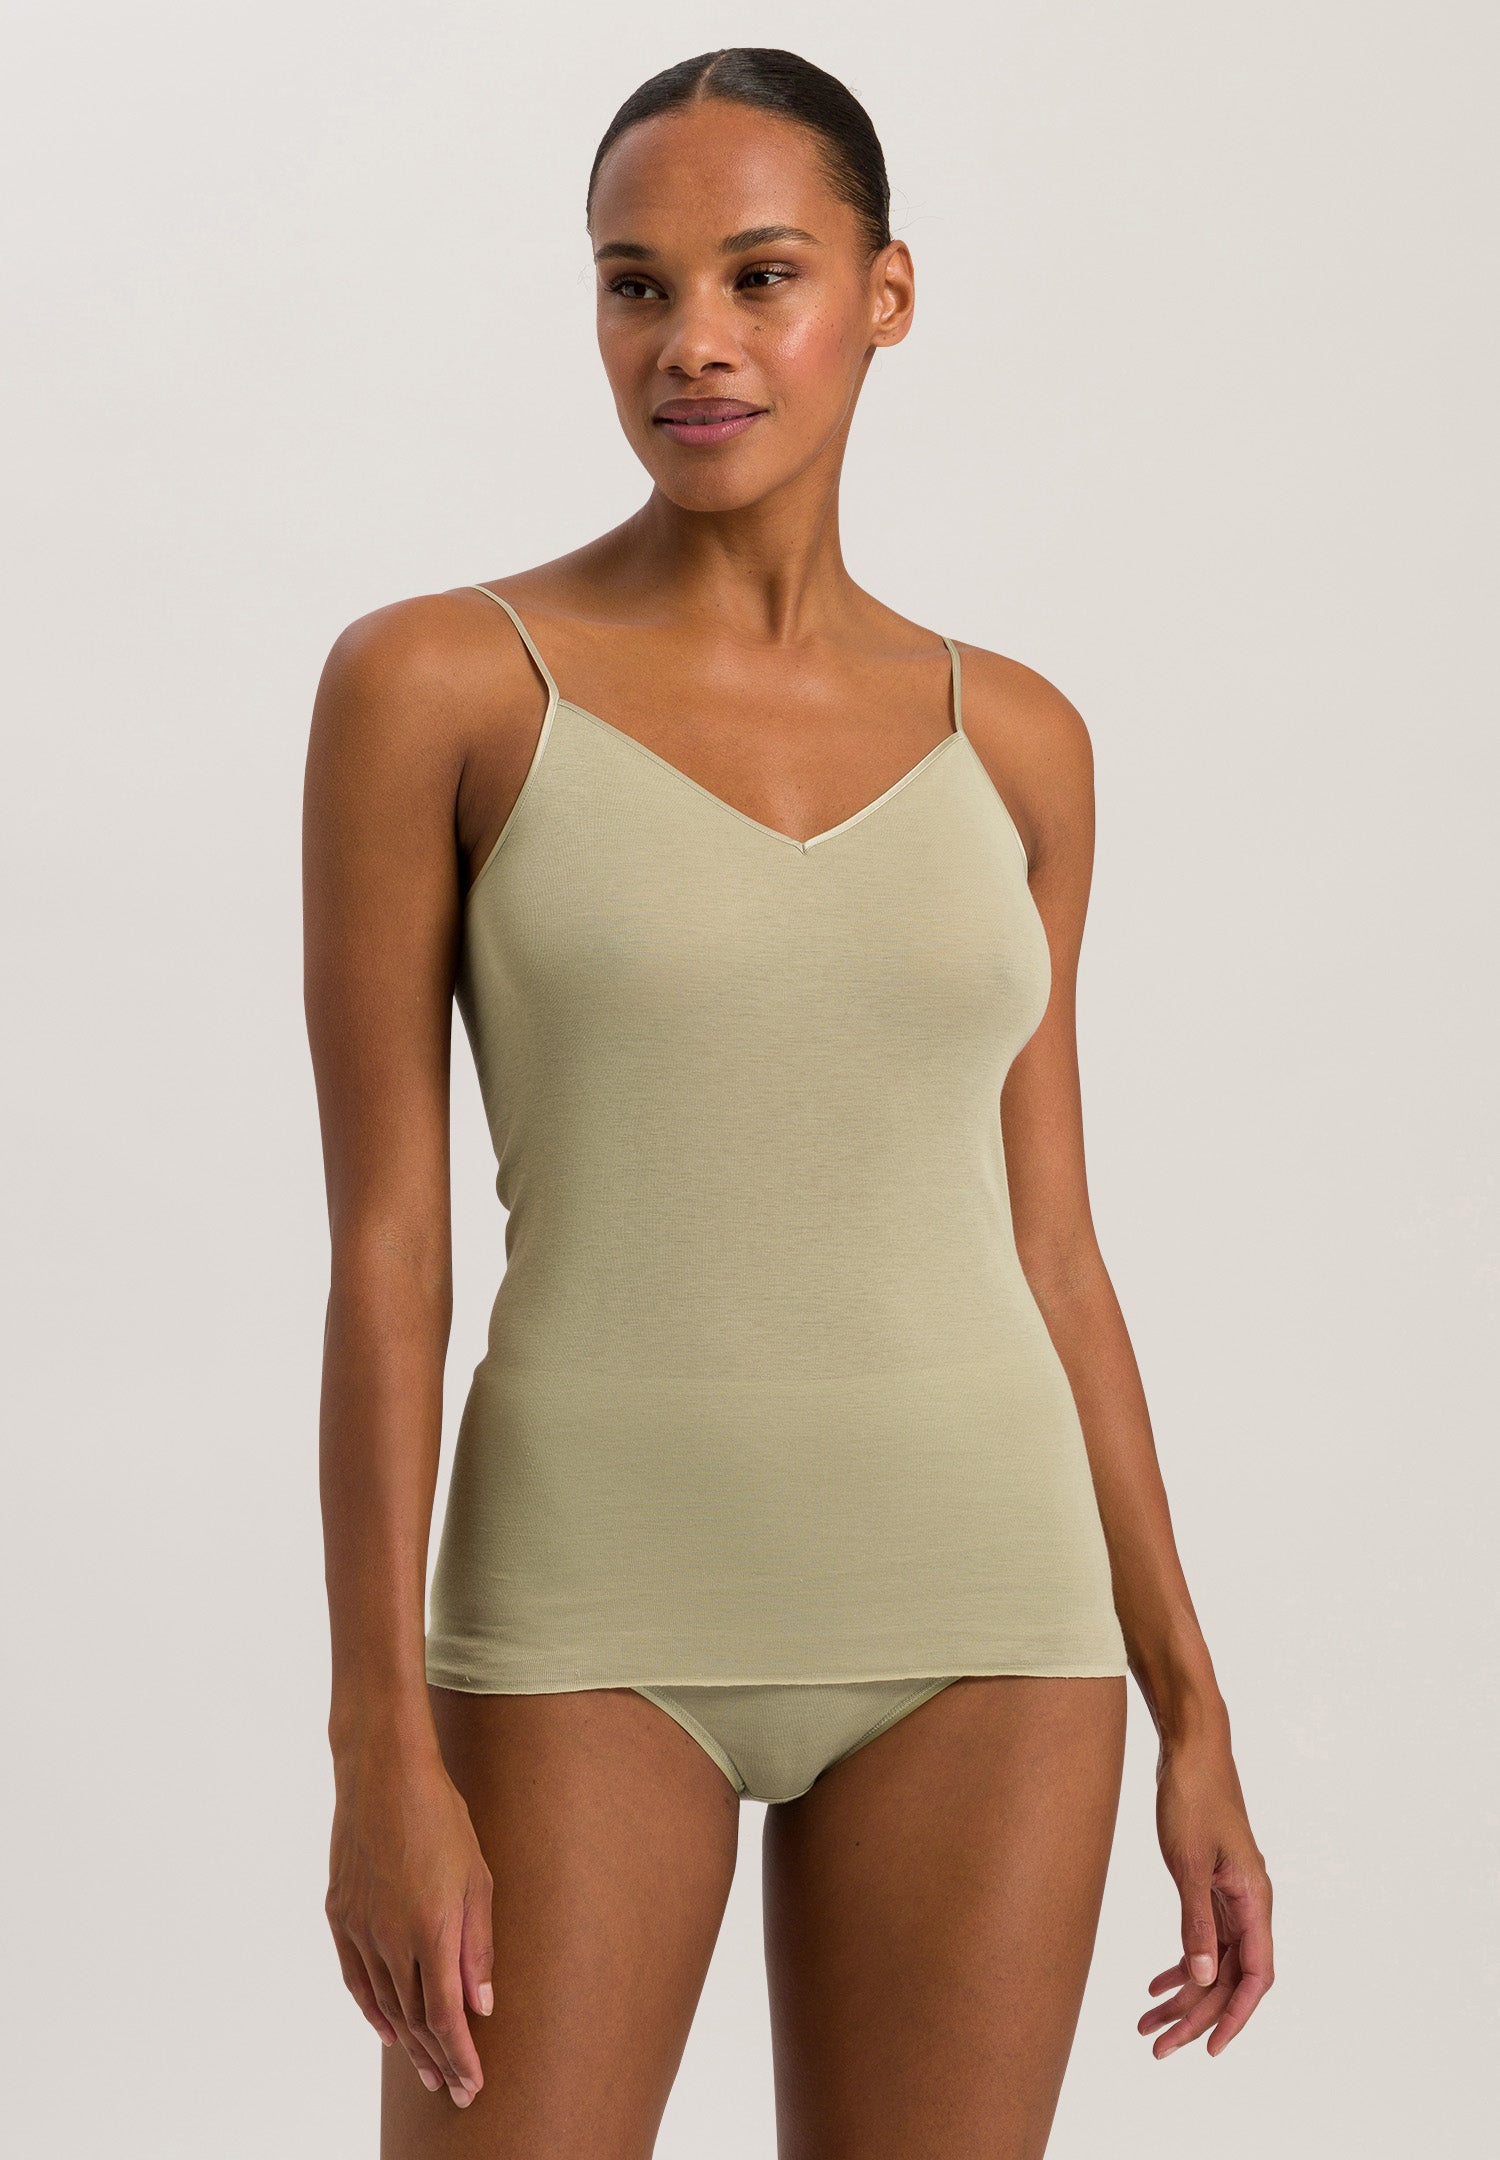 71601 Cotton Seamless V-Neck Camisole - 2720 Moss Green